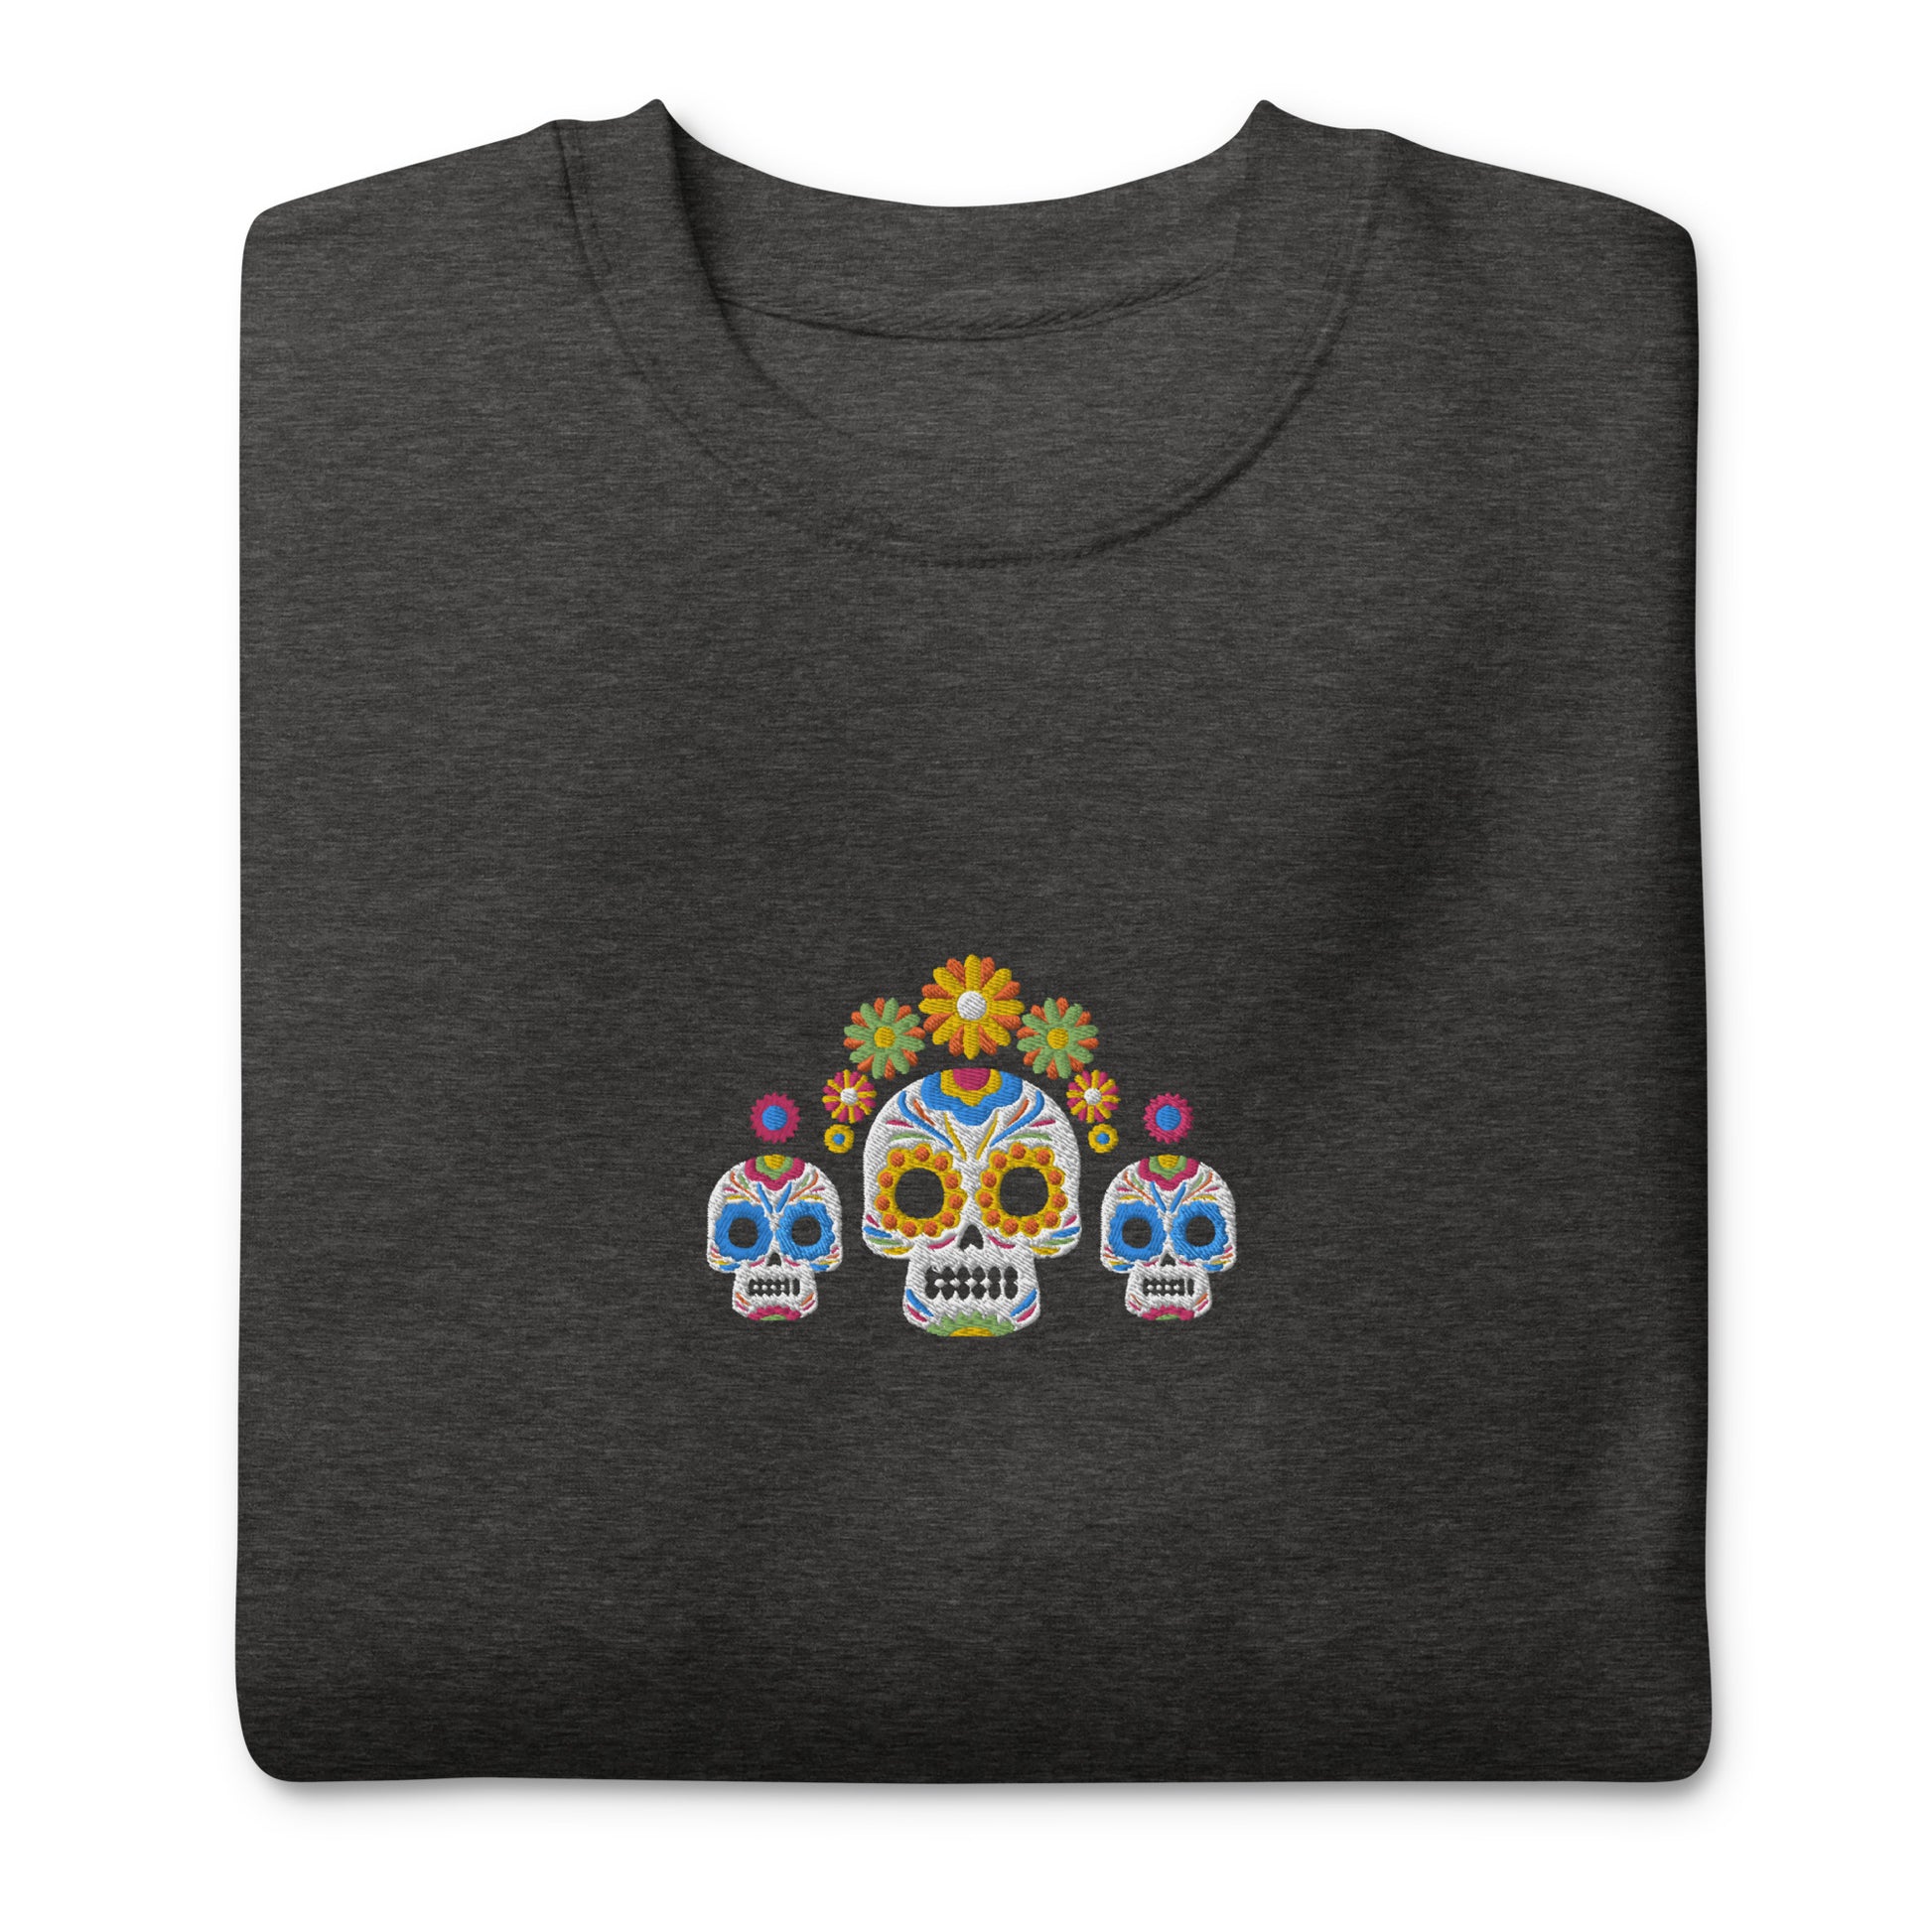 Mexican Day of the Dead Sweatshirt - Embroidered - The Global Wanderer